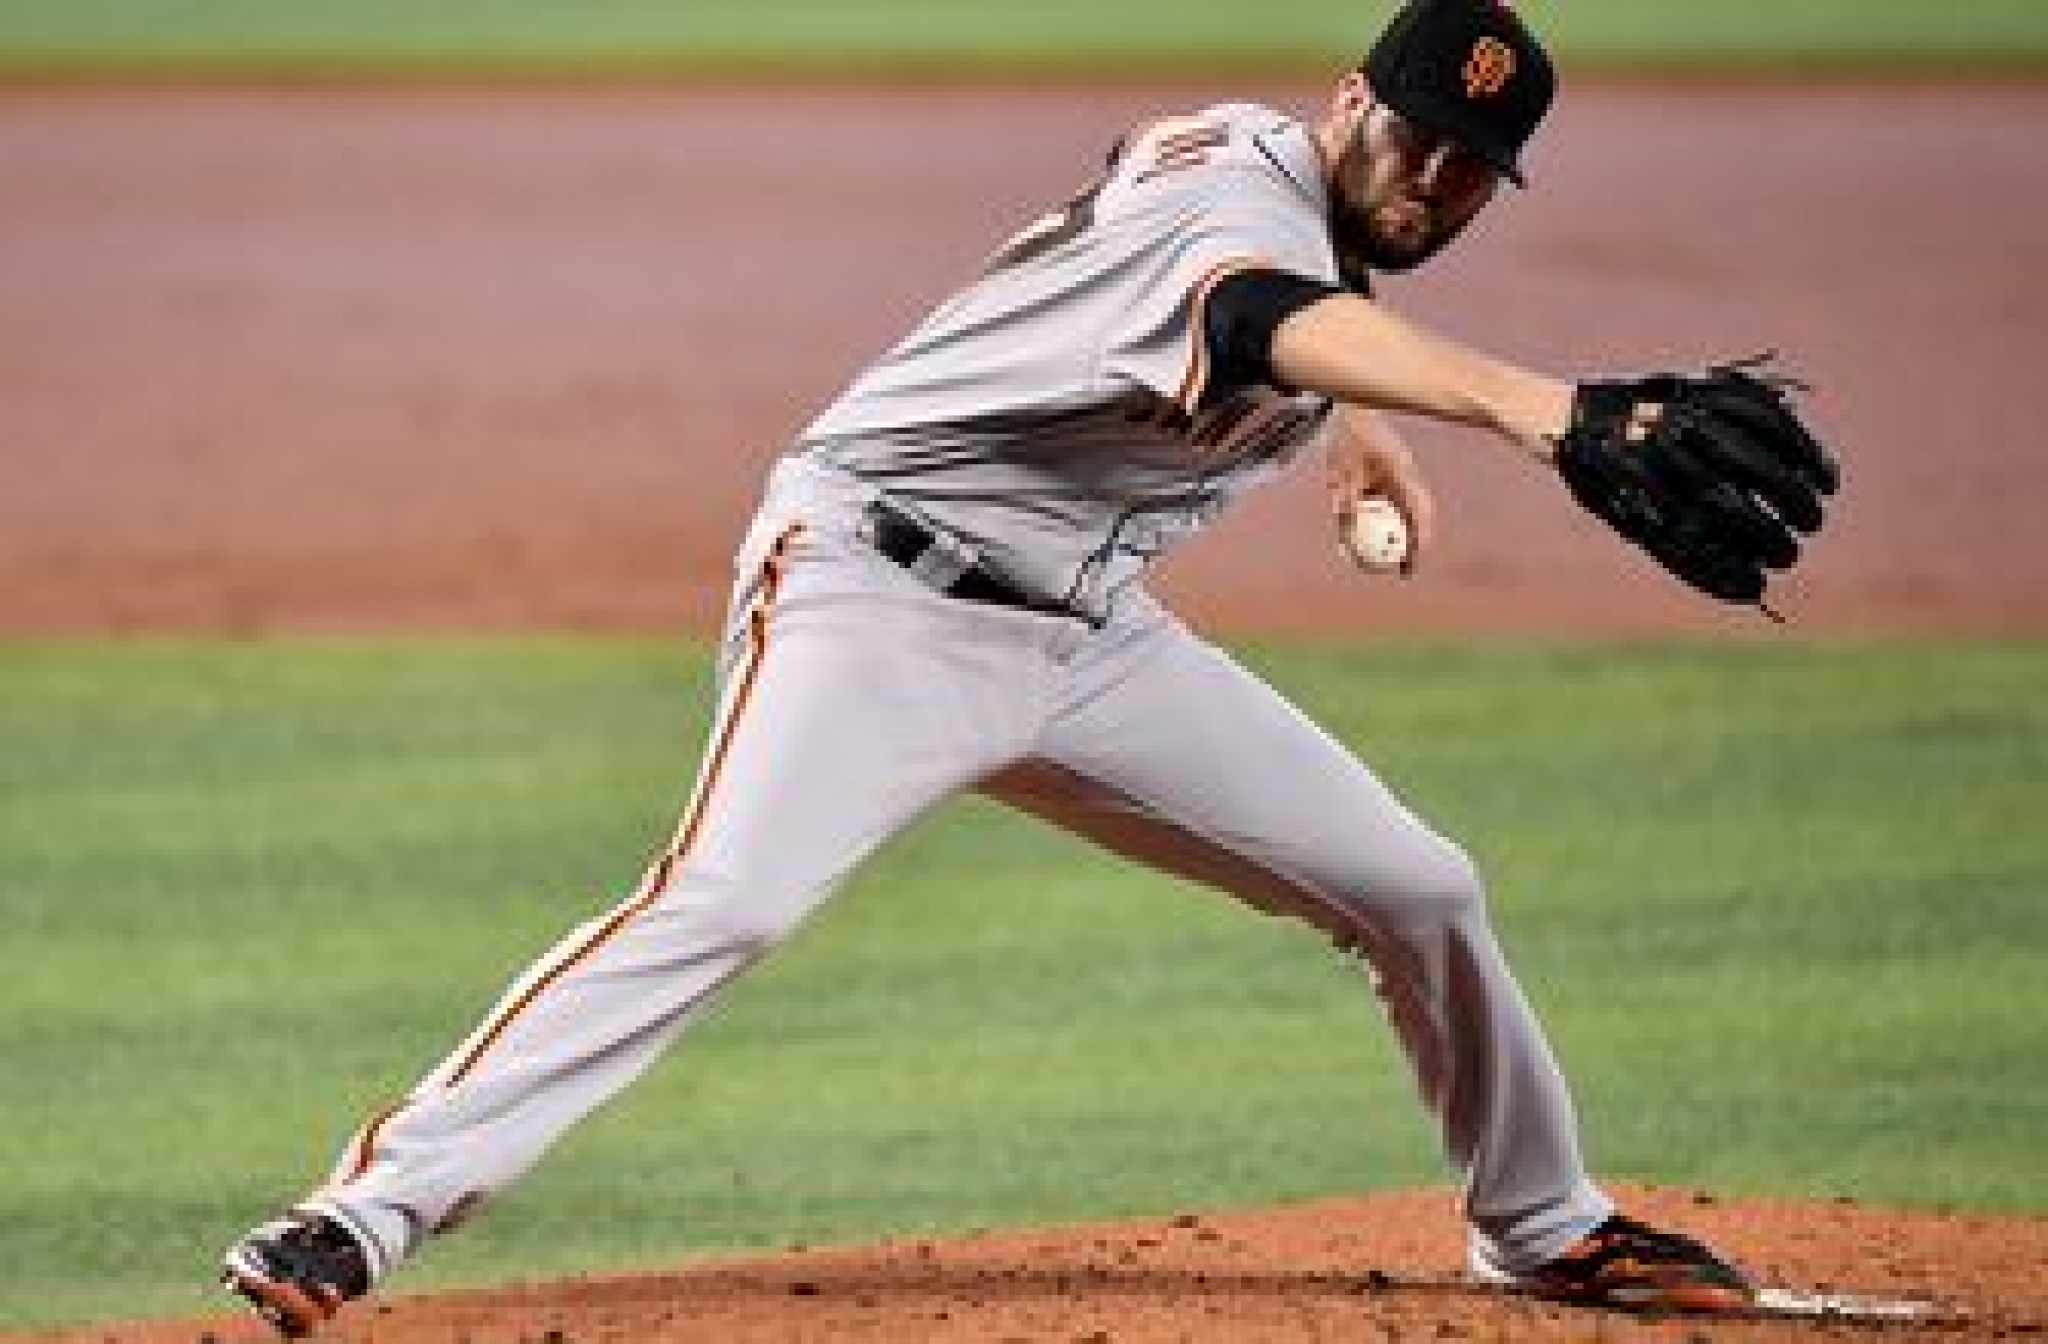 Giants only need one run to get past Marlins in 1-0 victory